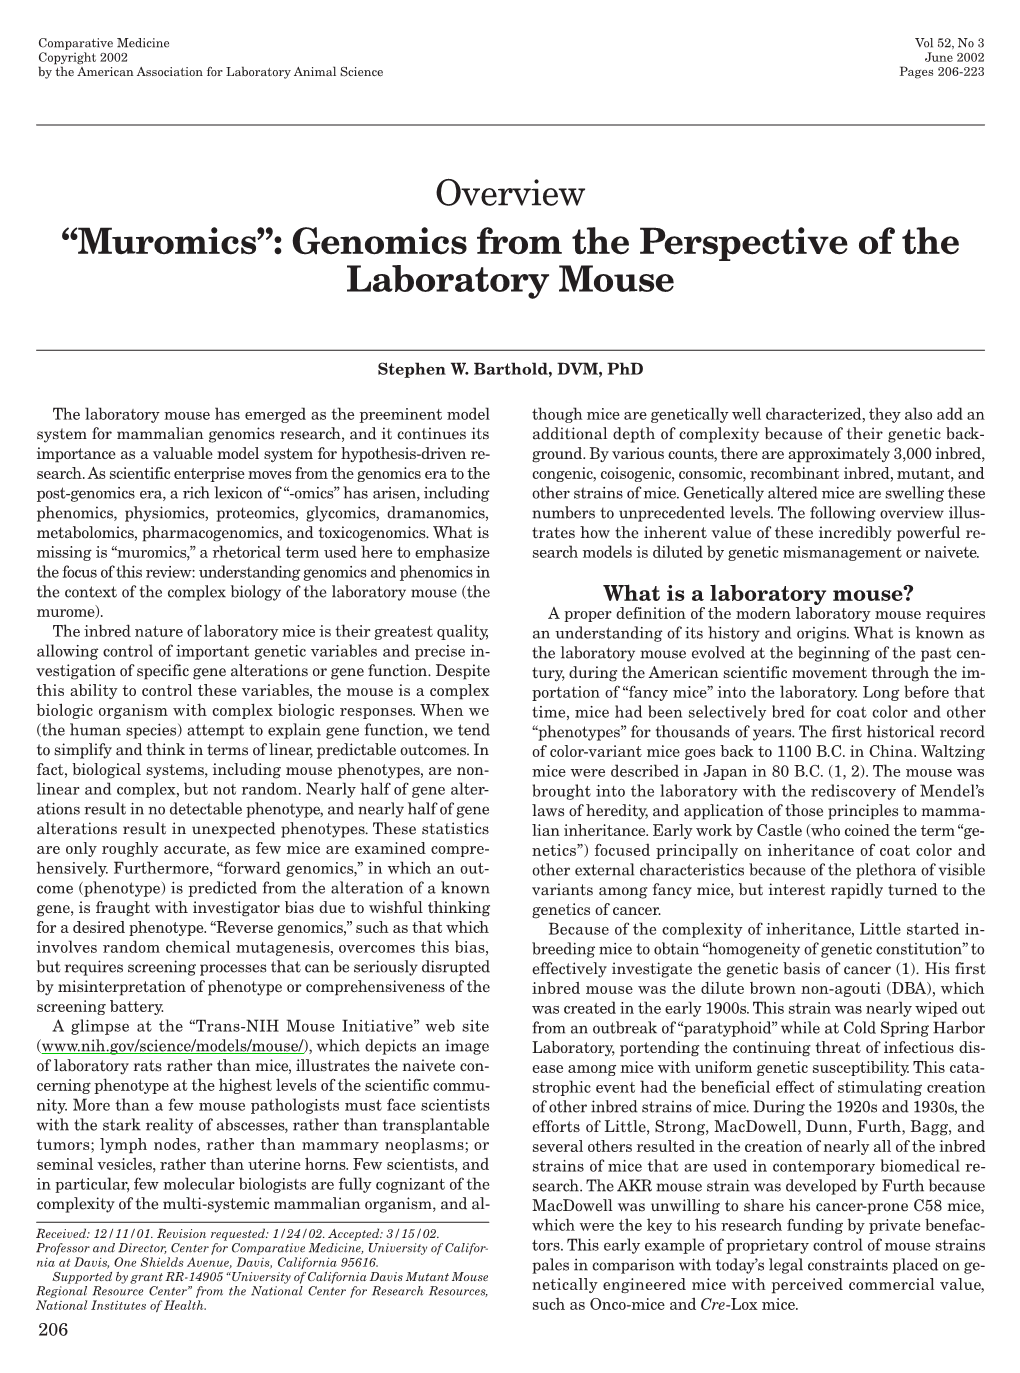 Genomics from the Perspective of the Laboratory Mouse